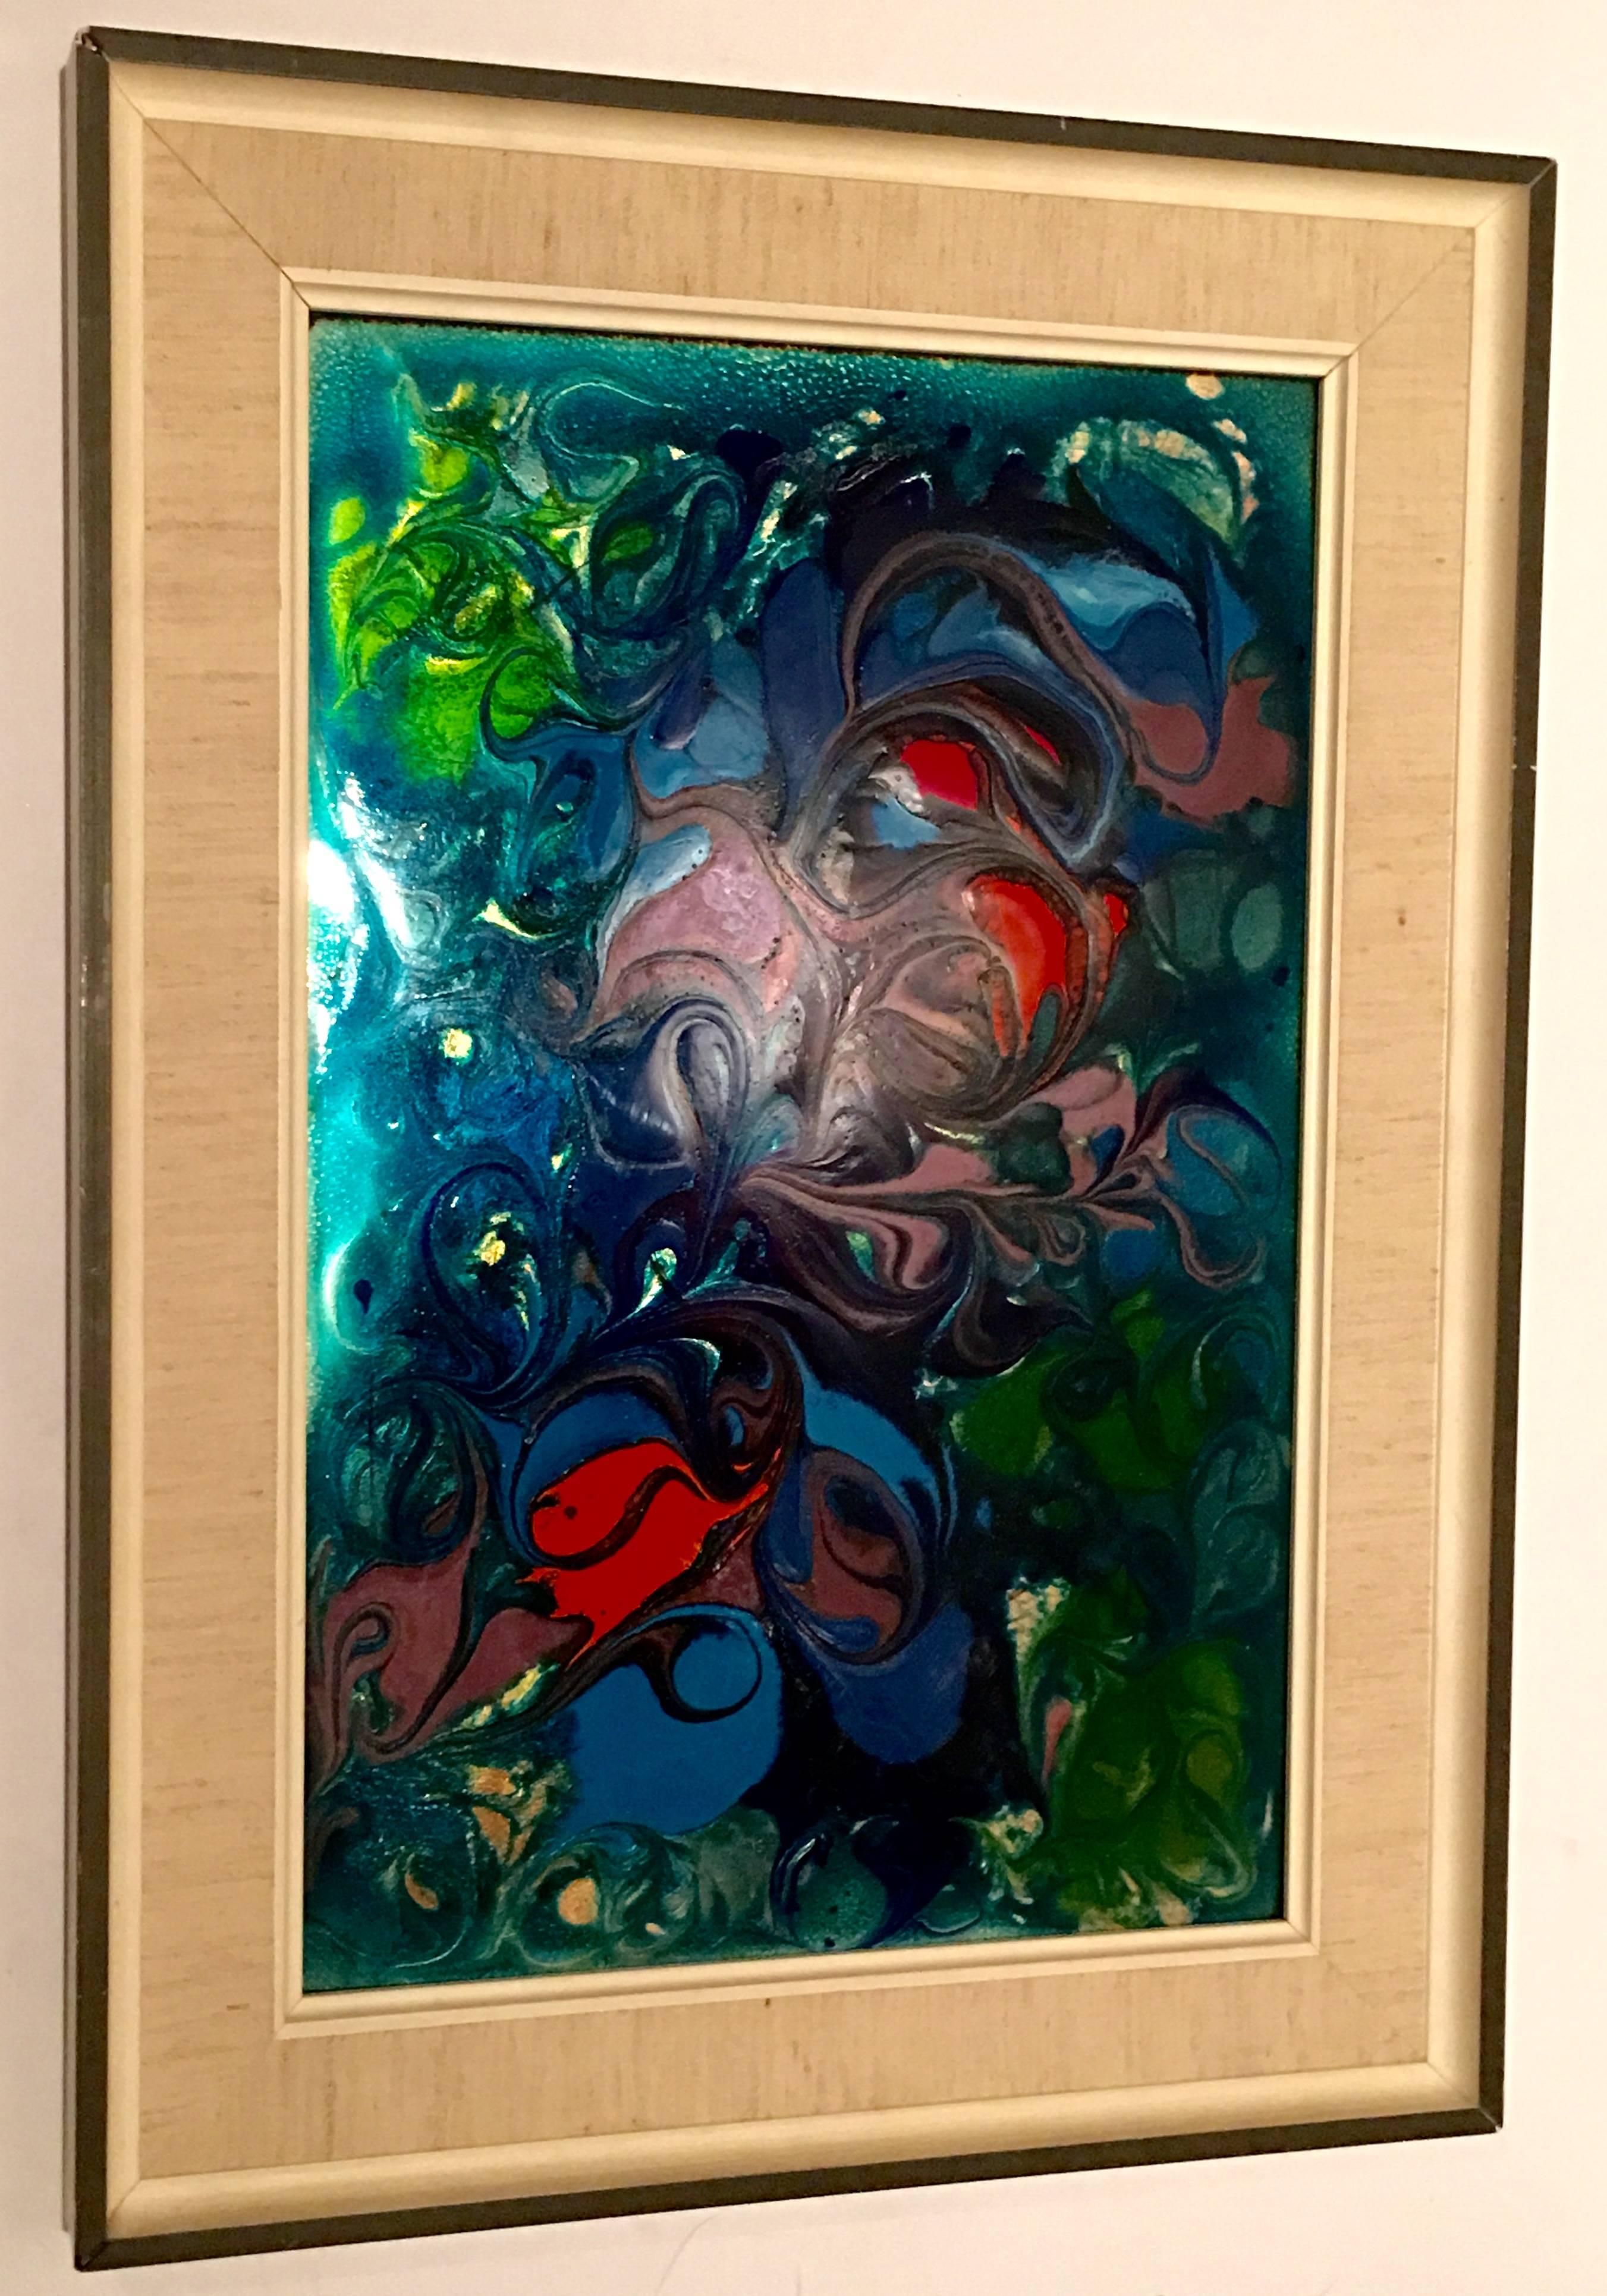 20th Century European Original Abstract Enamel On Metal Painting, Signed- numbered by artist, lower right, 034.20.8238.
This one of a kind abstract painting features, vibrant and high gloss both muted and neon color effects in greens, blues, purple,